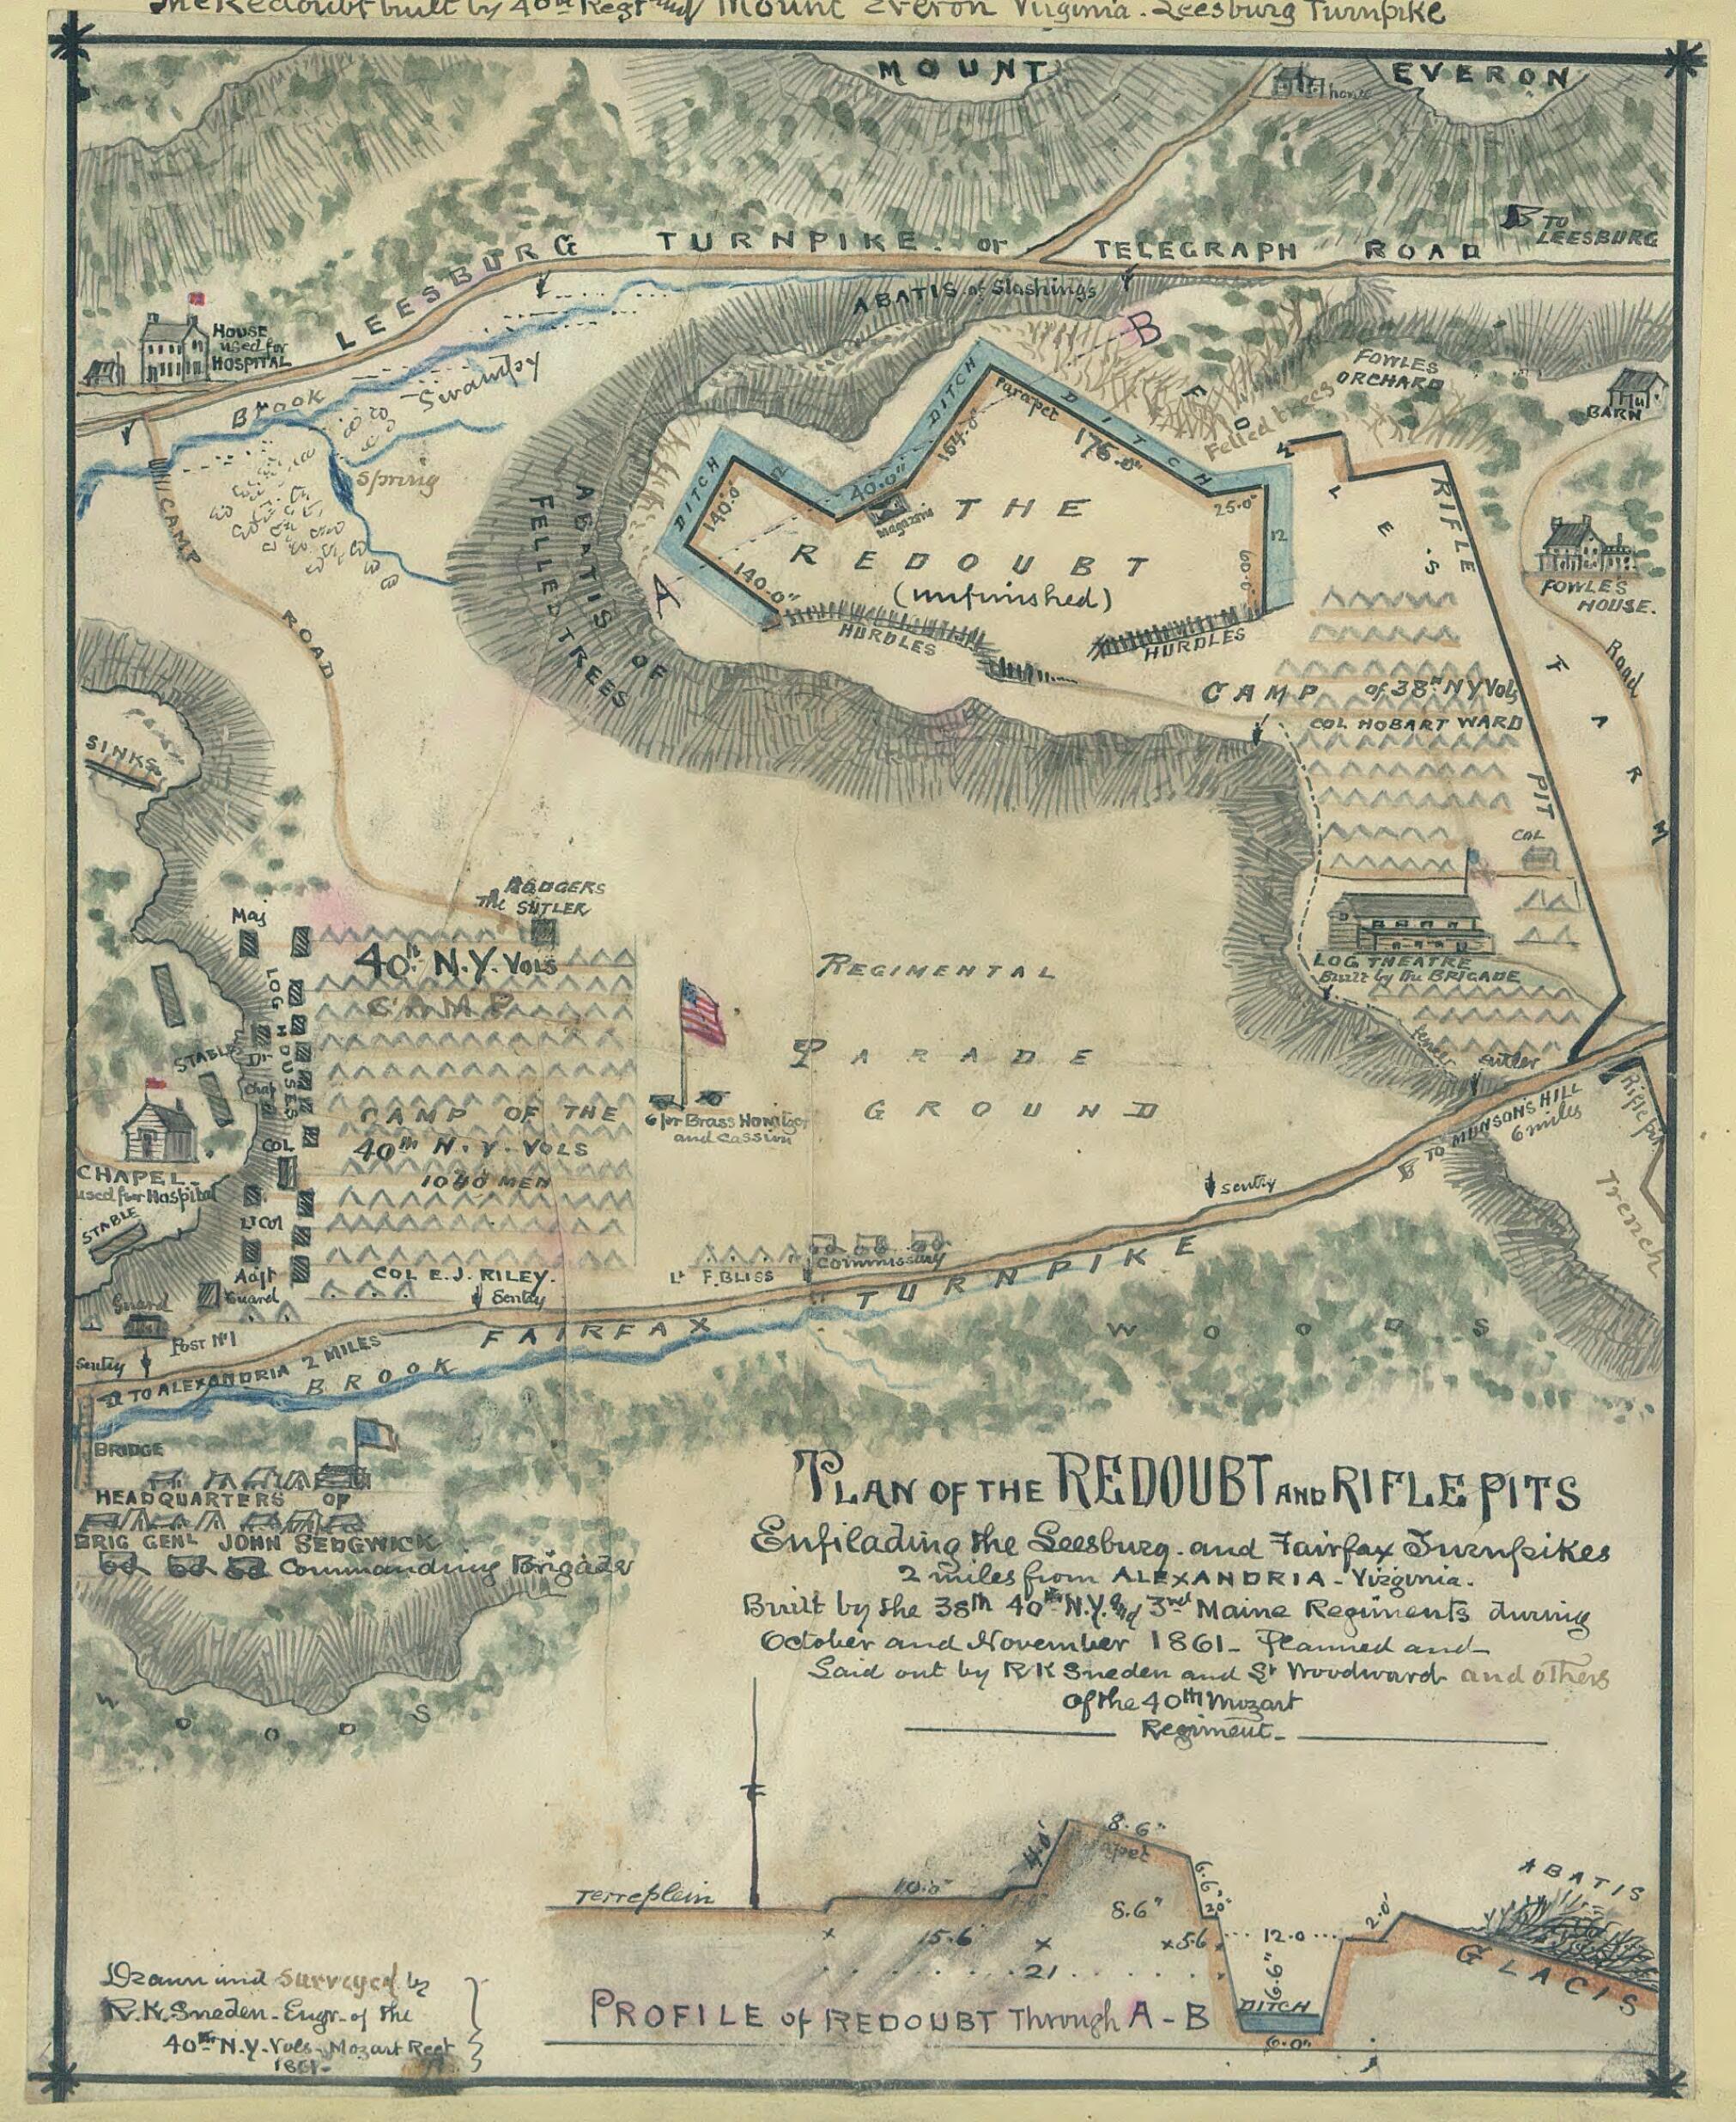 This old map of Plan of the Redoubt and Rifle Pits Ensilading sic the Leesburg and Fairfax Turnpikes 2 Miles from Alexandria, Virginia. Built by the 38th, 40th New York and 3rd Maine Regiments During October and November from 1861 was created by Robert K